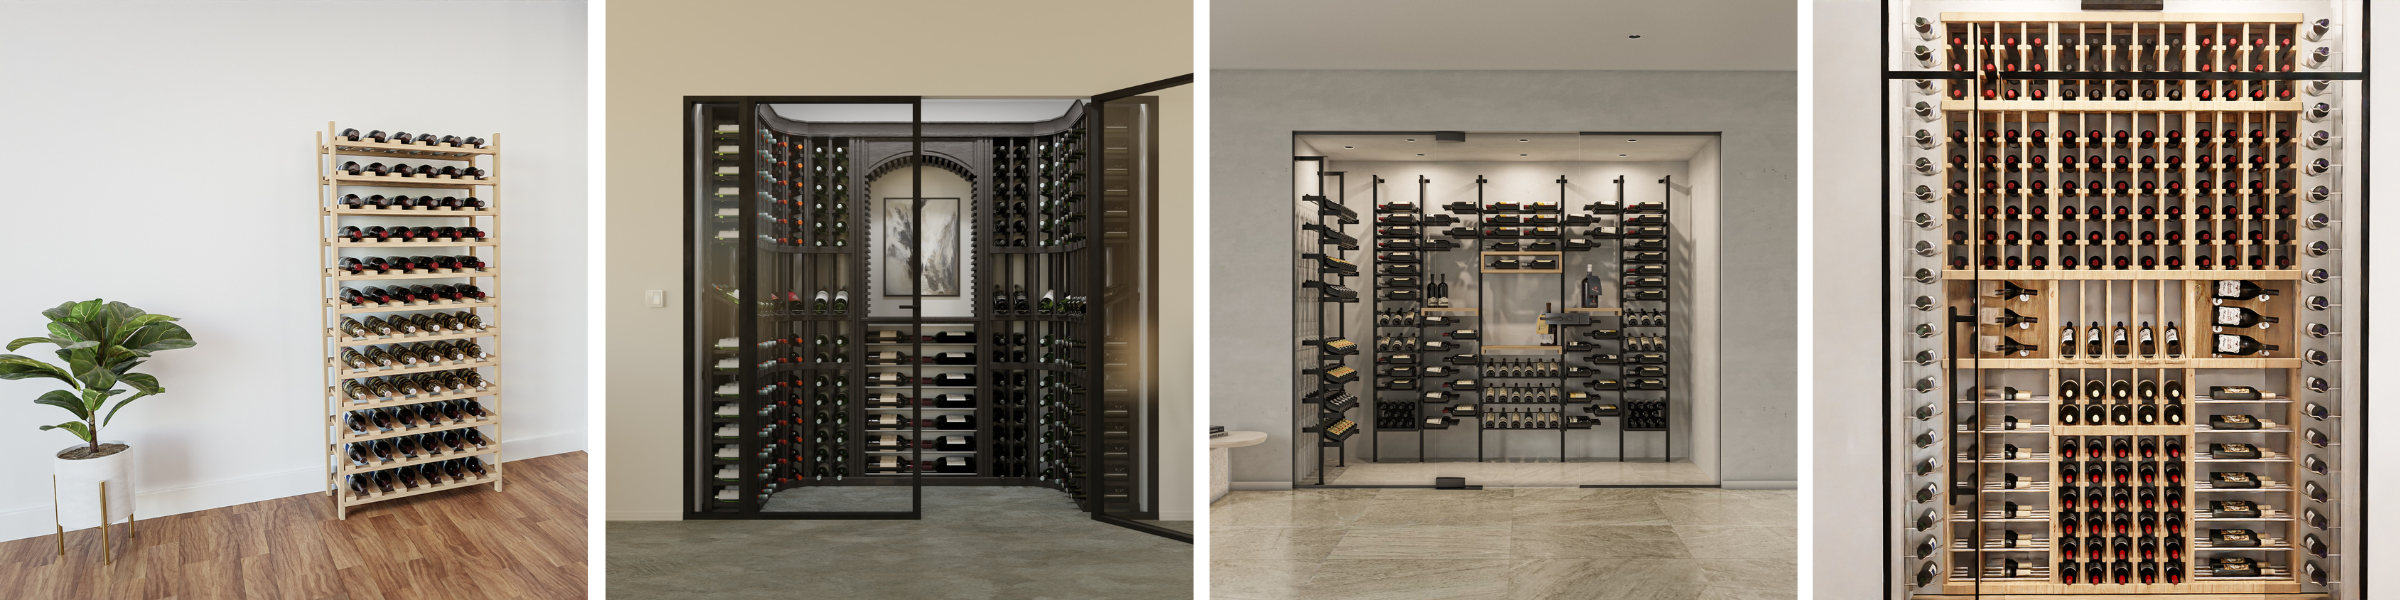 different-styles-of-wine-racks-feature-image